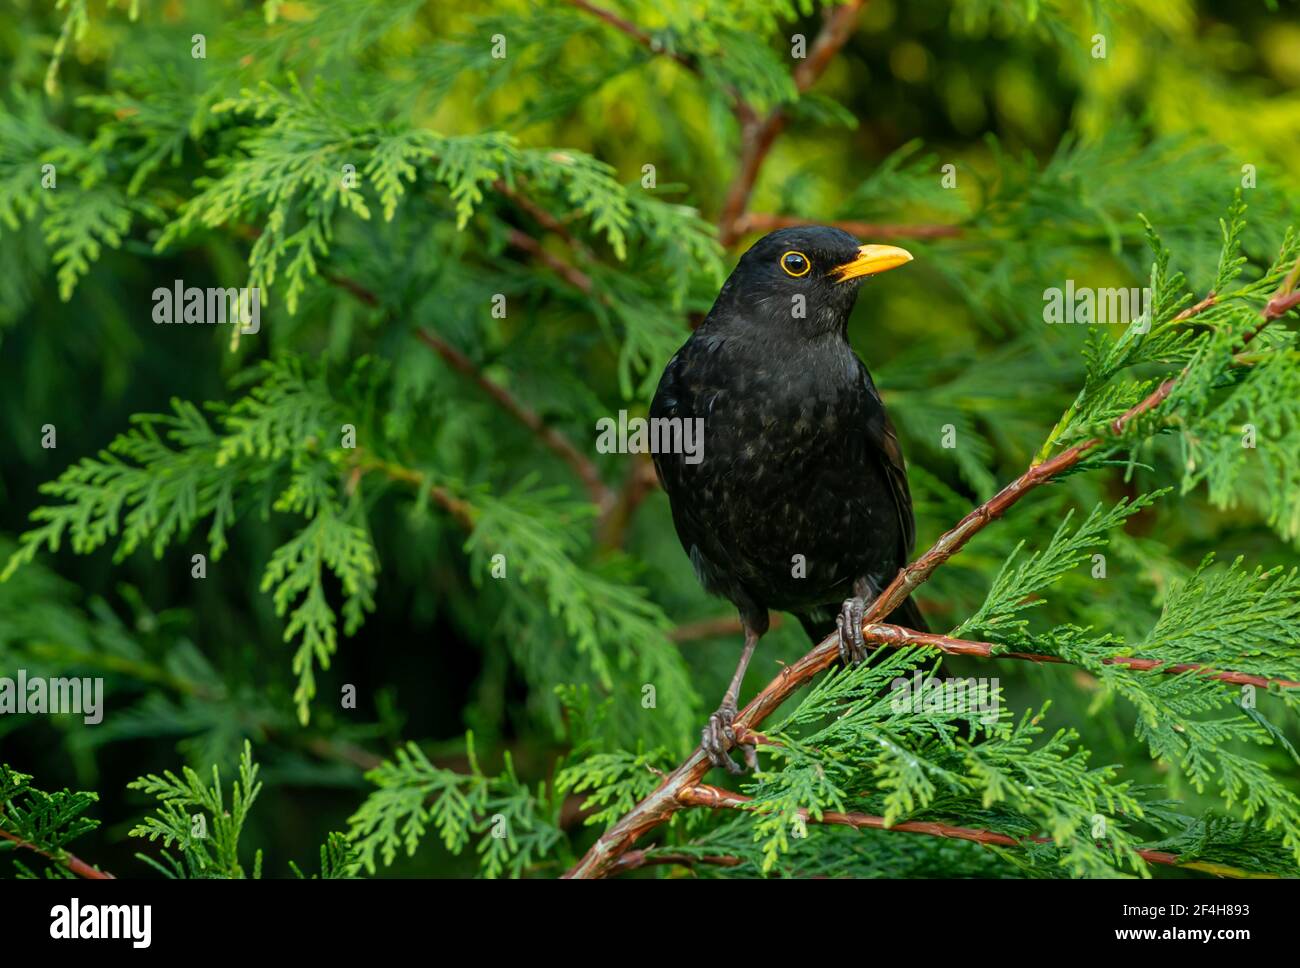 Blackbird, Scientific name: Turdus merula. Close up of an alert male blackbird, facing right  and perching in a green conifer tree.  Leafy blurred bac Stock Photo